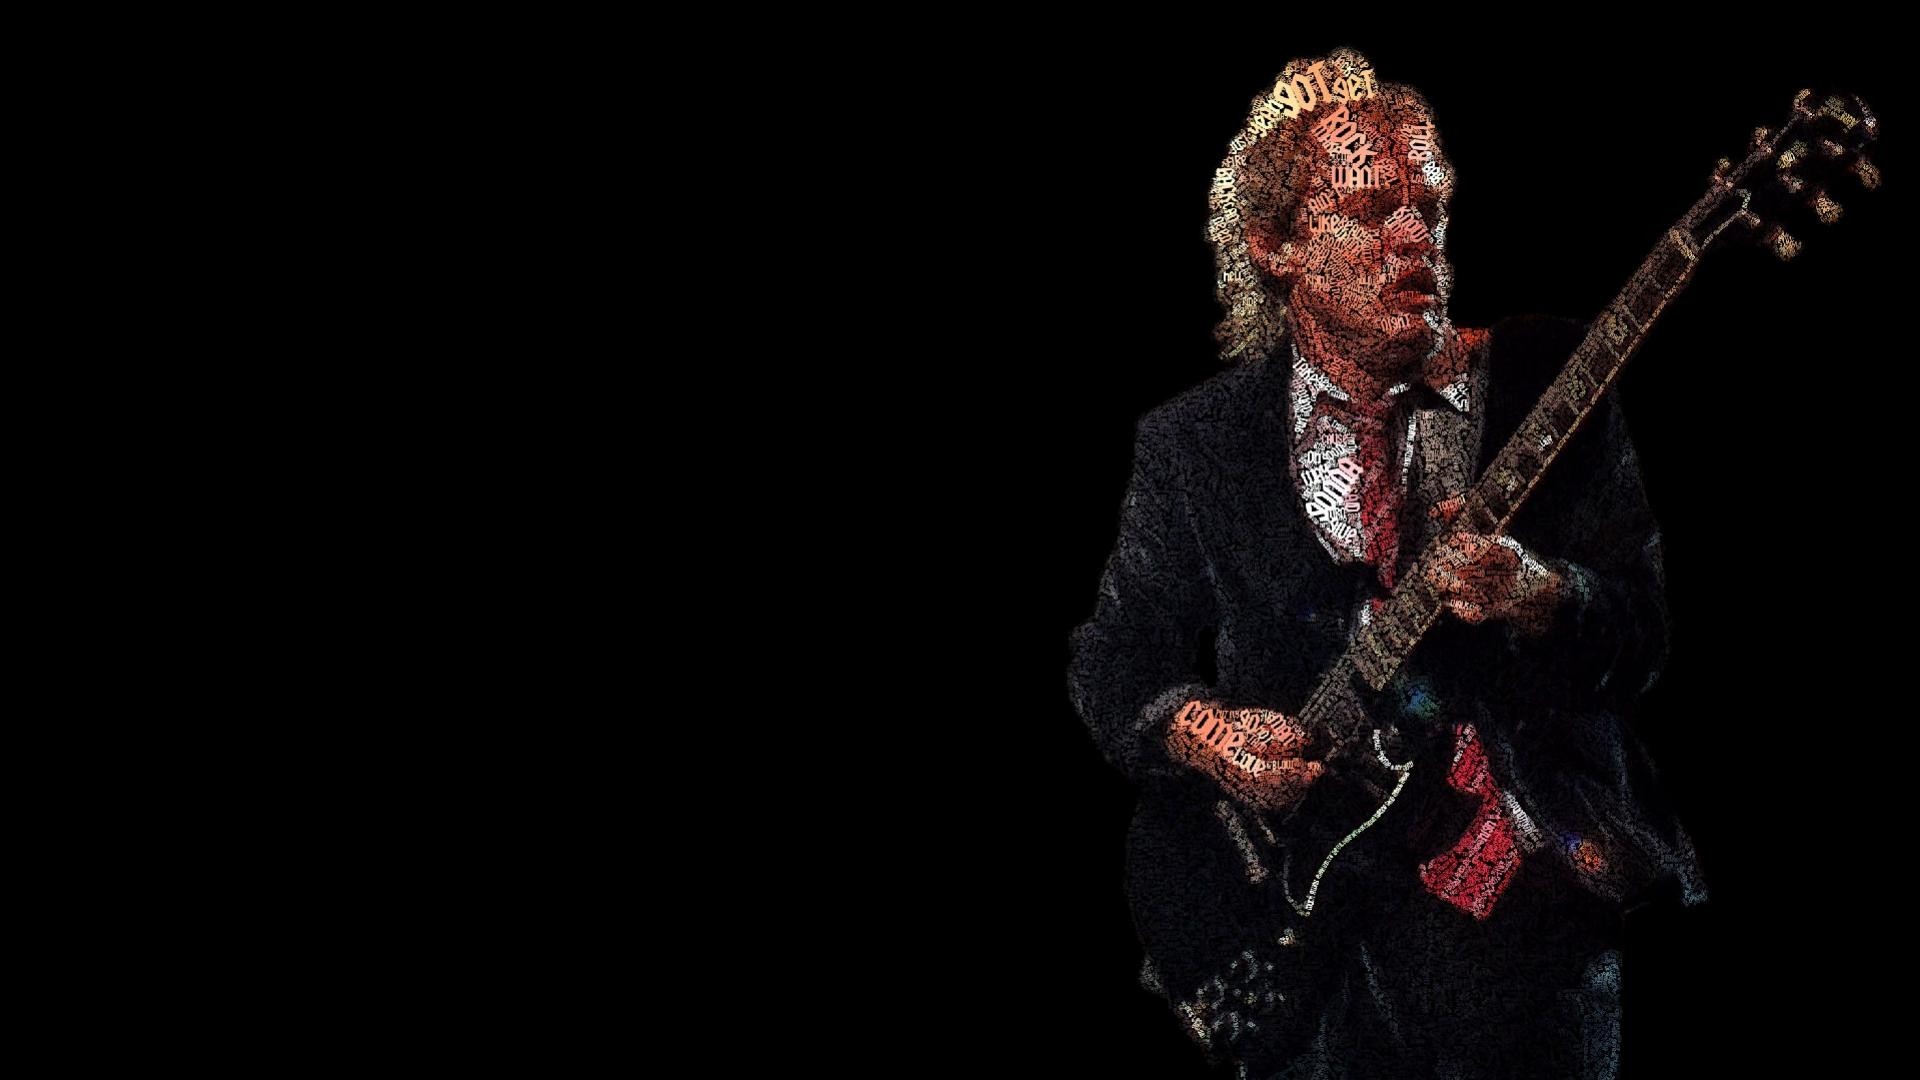 General 1920x1080 AC/DC Angus Young typographic portraits Gibson SG Gibson guitar men music artwork musical instrument simple background black background musician band